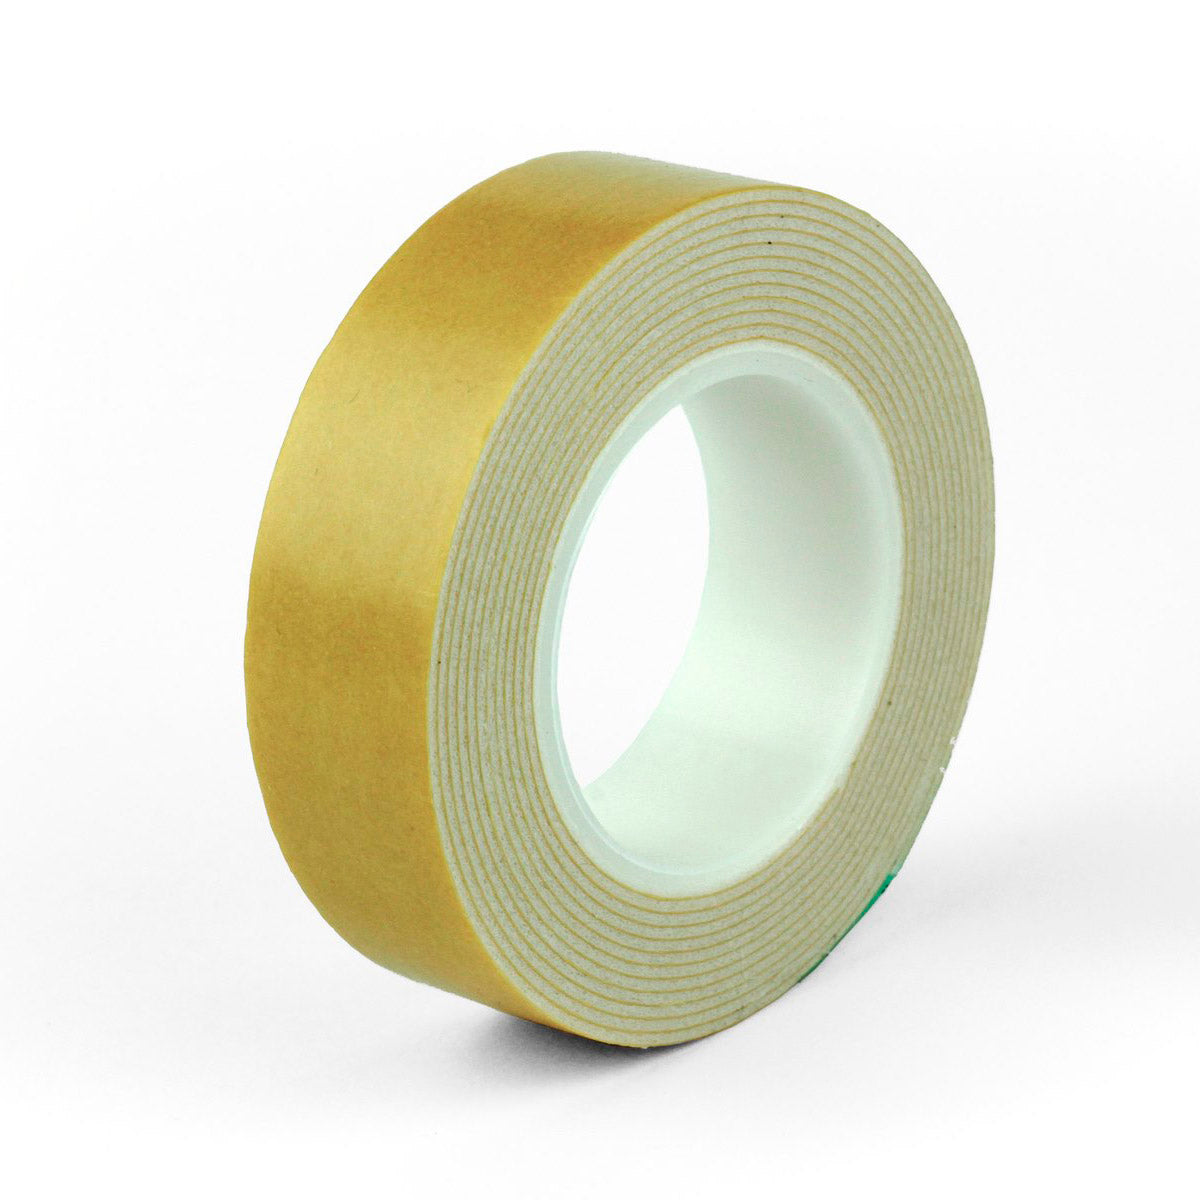 Furndiy Double Sided Heavy Duty Mounting Tape, Indoor & Outdoor Waterproof Mounting Foam Tape, Strong Adhesion Tape